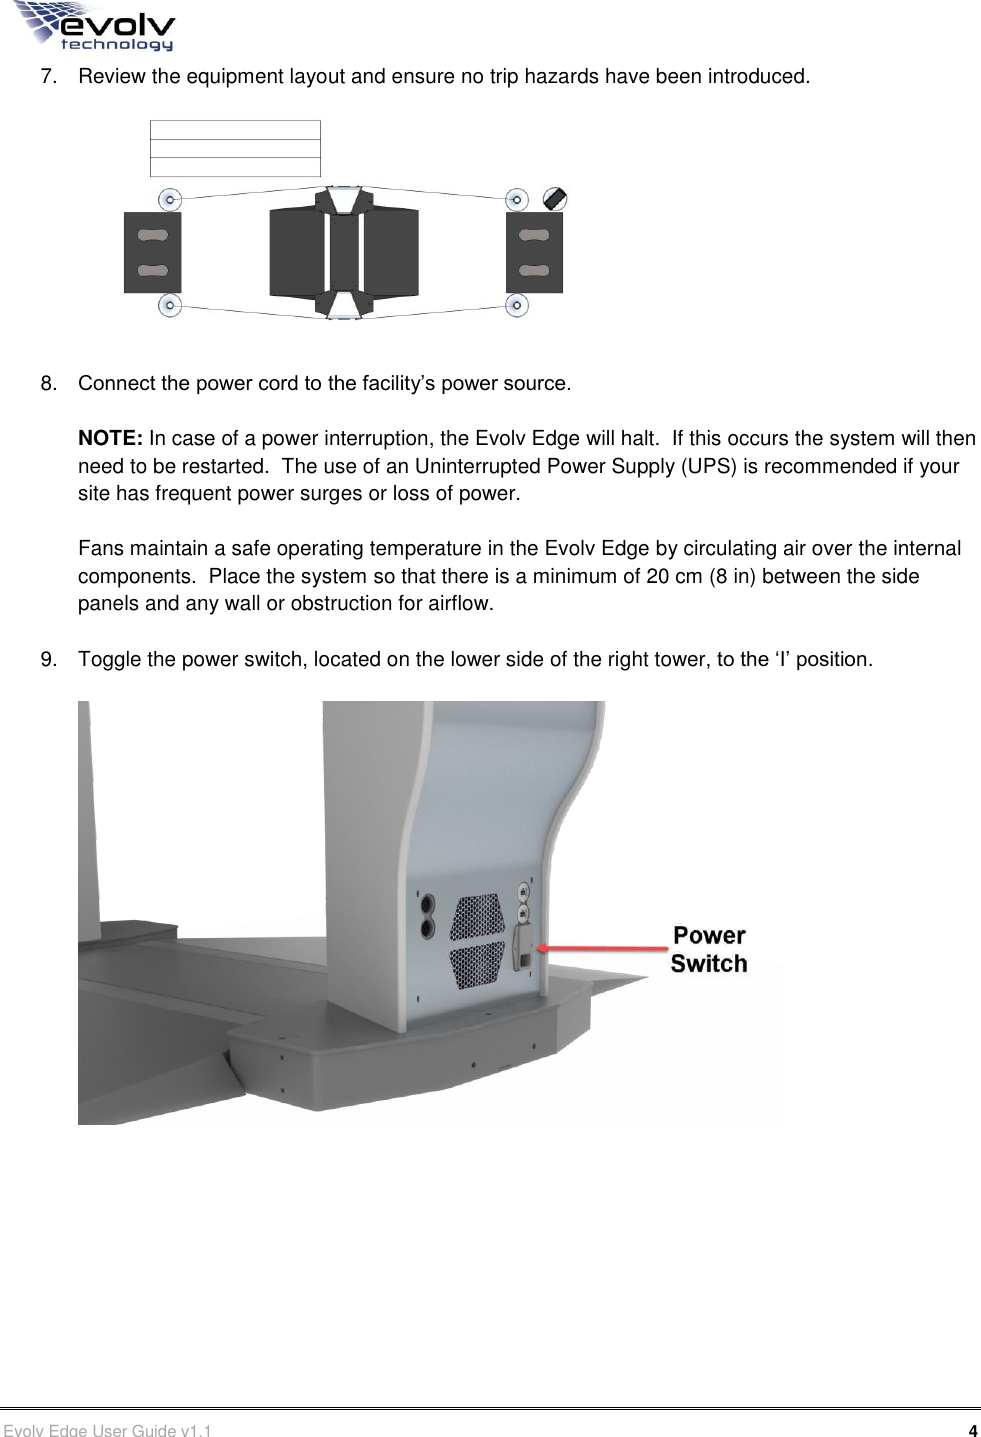      Evolv Edge User Guide v1.1      4 Part Number: 500-00003 7.  Review the equipment layout and ensure no trip hazards have been introduced.   8. Connect the power cord to the facility’s power source.  NOTE: In case of a power interruption, the Evolv Edge will halt.  If this occurs the system will then need to be restarted.  The use of an Uninterrupted Power Supply (UPS) is recommended if your site has frequent power surges or loss of power.   Fans maintain a safe operating temperature in the Evolv Edge by circulating air over the internal components.  Place the system so that there is a minimum of 20 cm (8 in) between the side panels and any wall or obstruction for airflow.  9.  Toggle the power switch, located on the lower side of the right tower, to the ‘I’ position.           